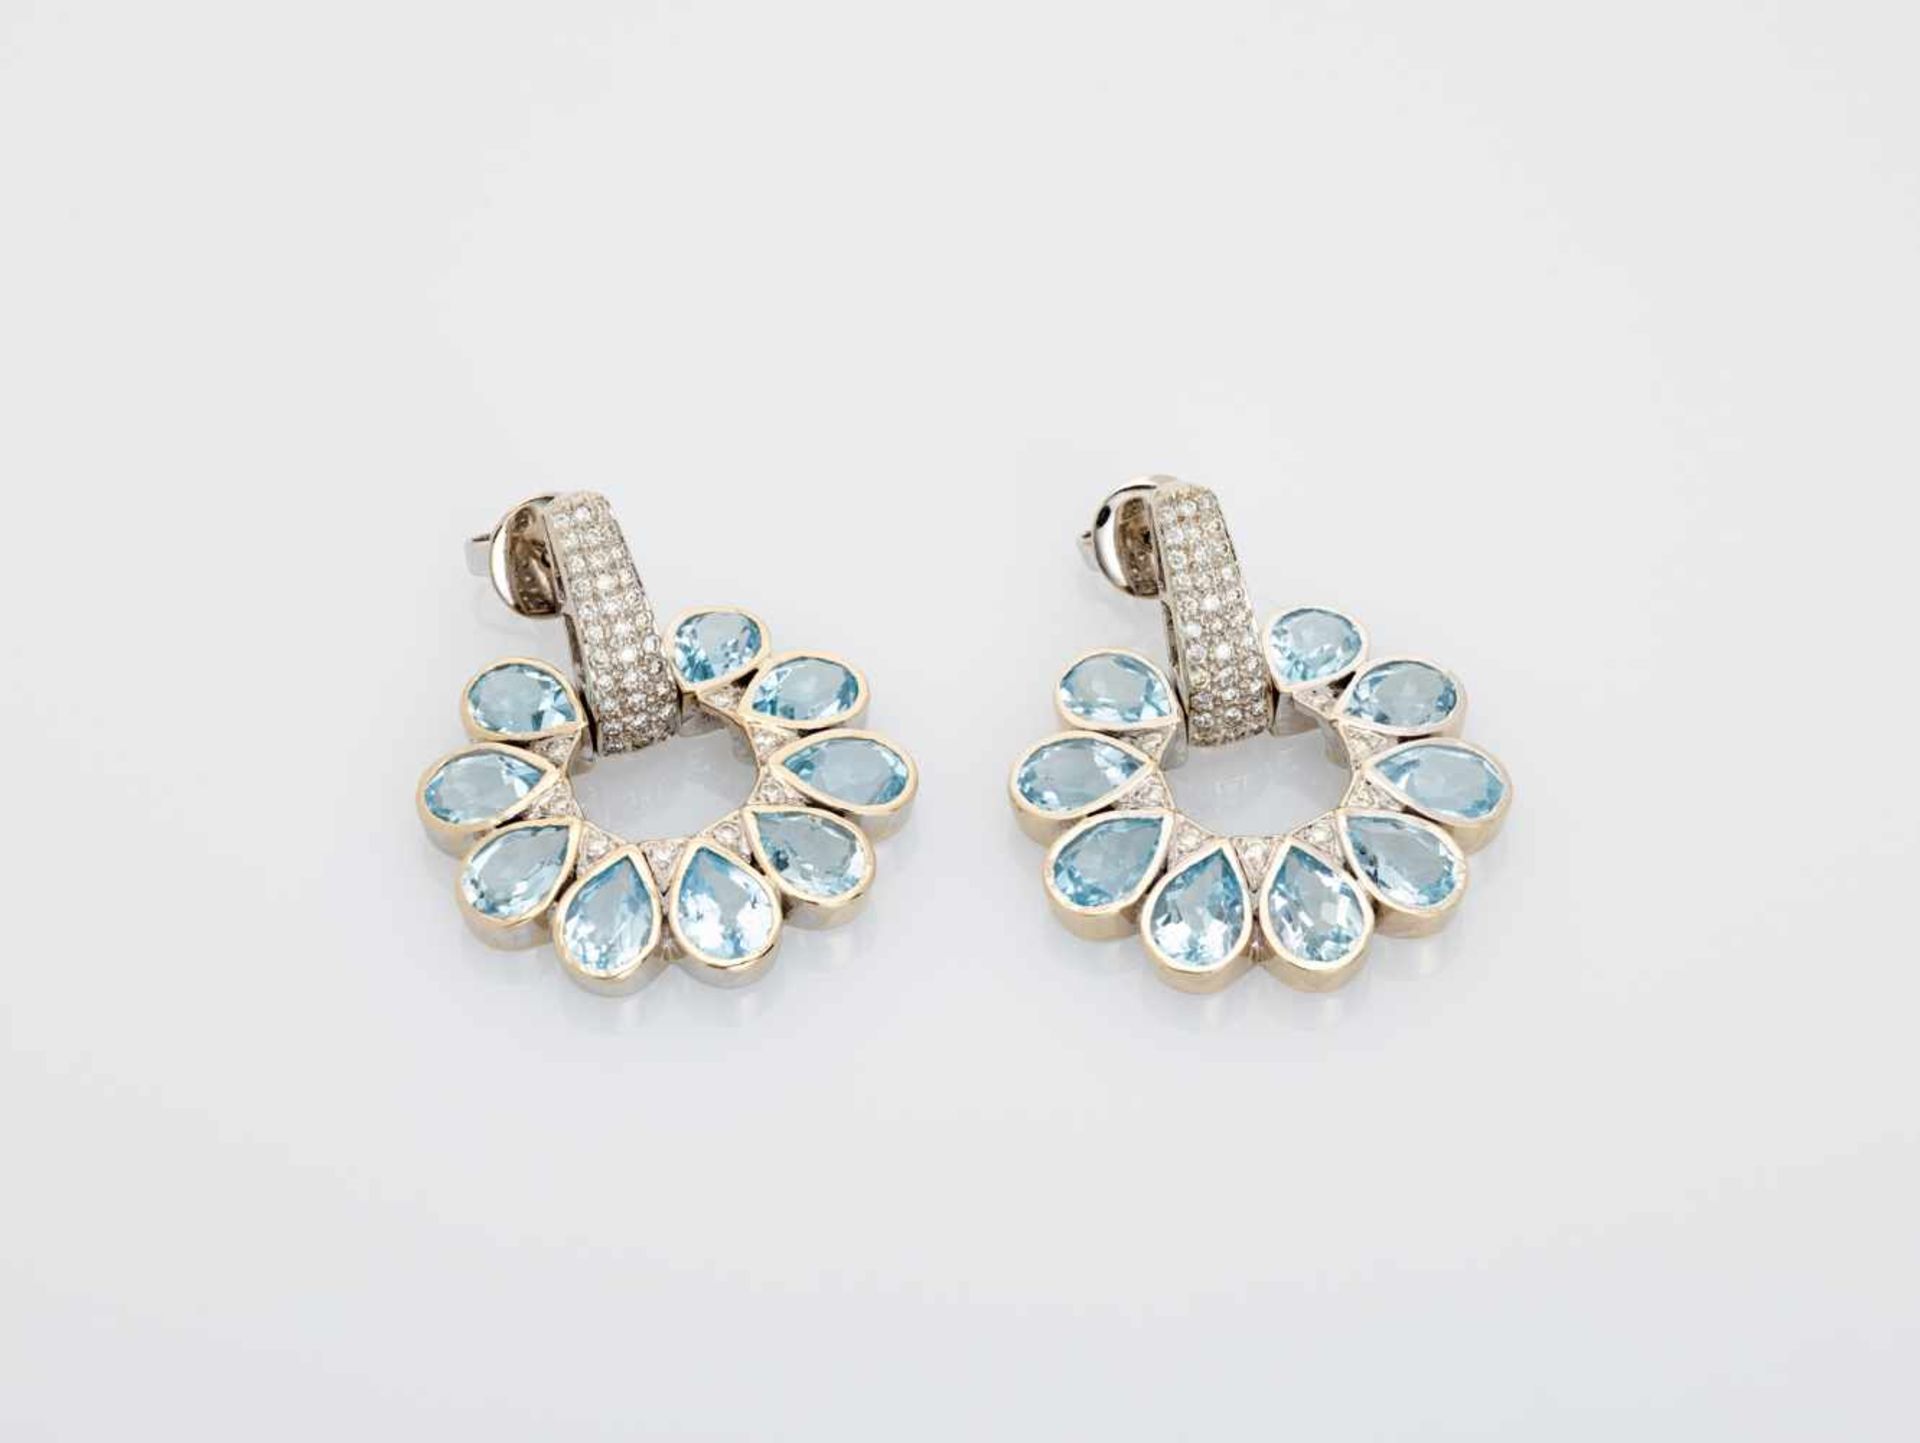 A PAIR OF 18 CARAT GOLD AND DIAMOND EARRINGS WITH AQUAMARINE DROPSincised at the sides with the - Image 3 of 6